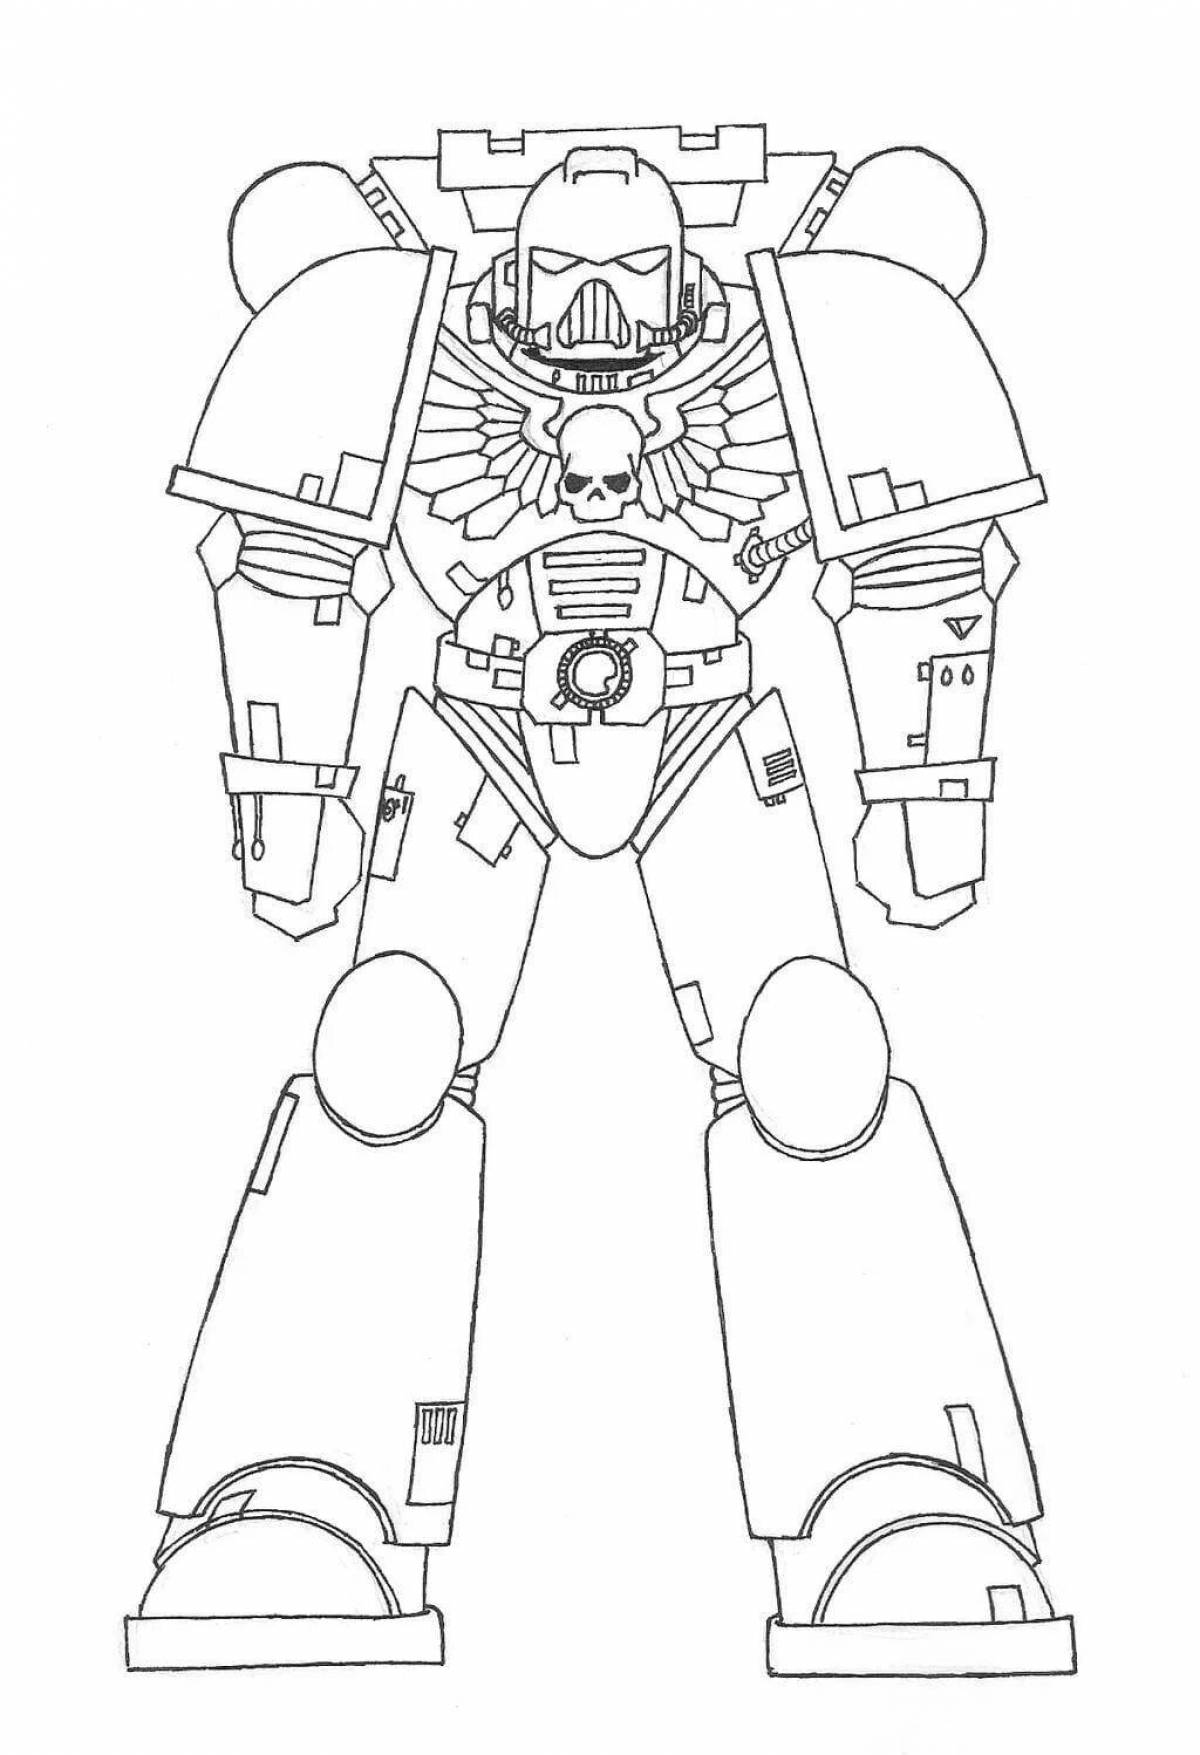 Coloring book bright space marine